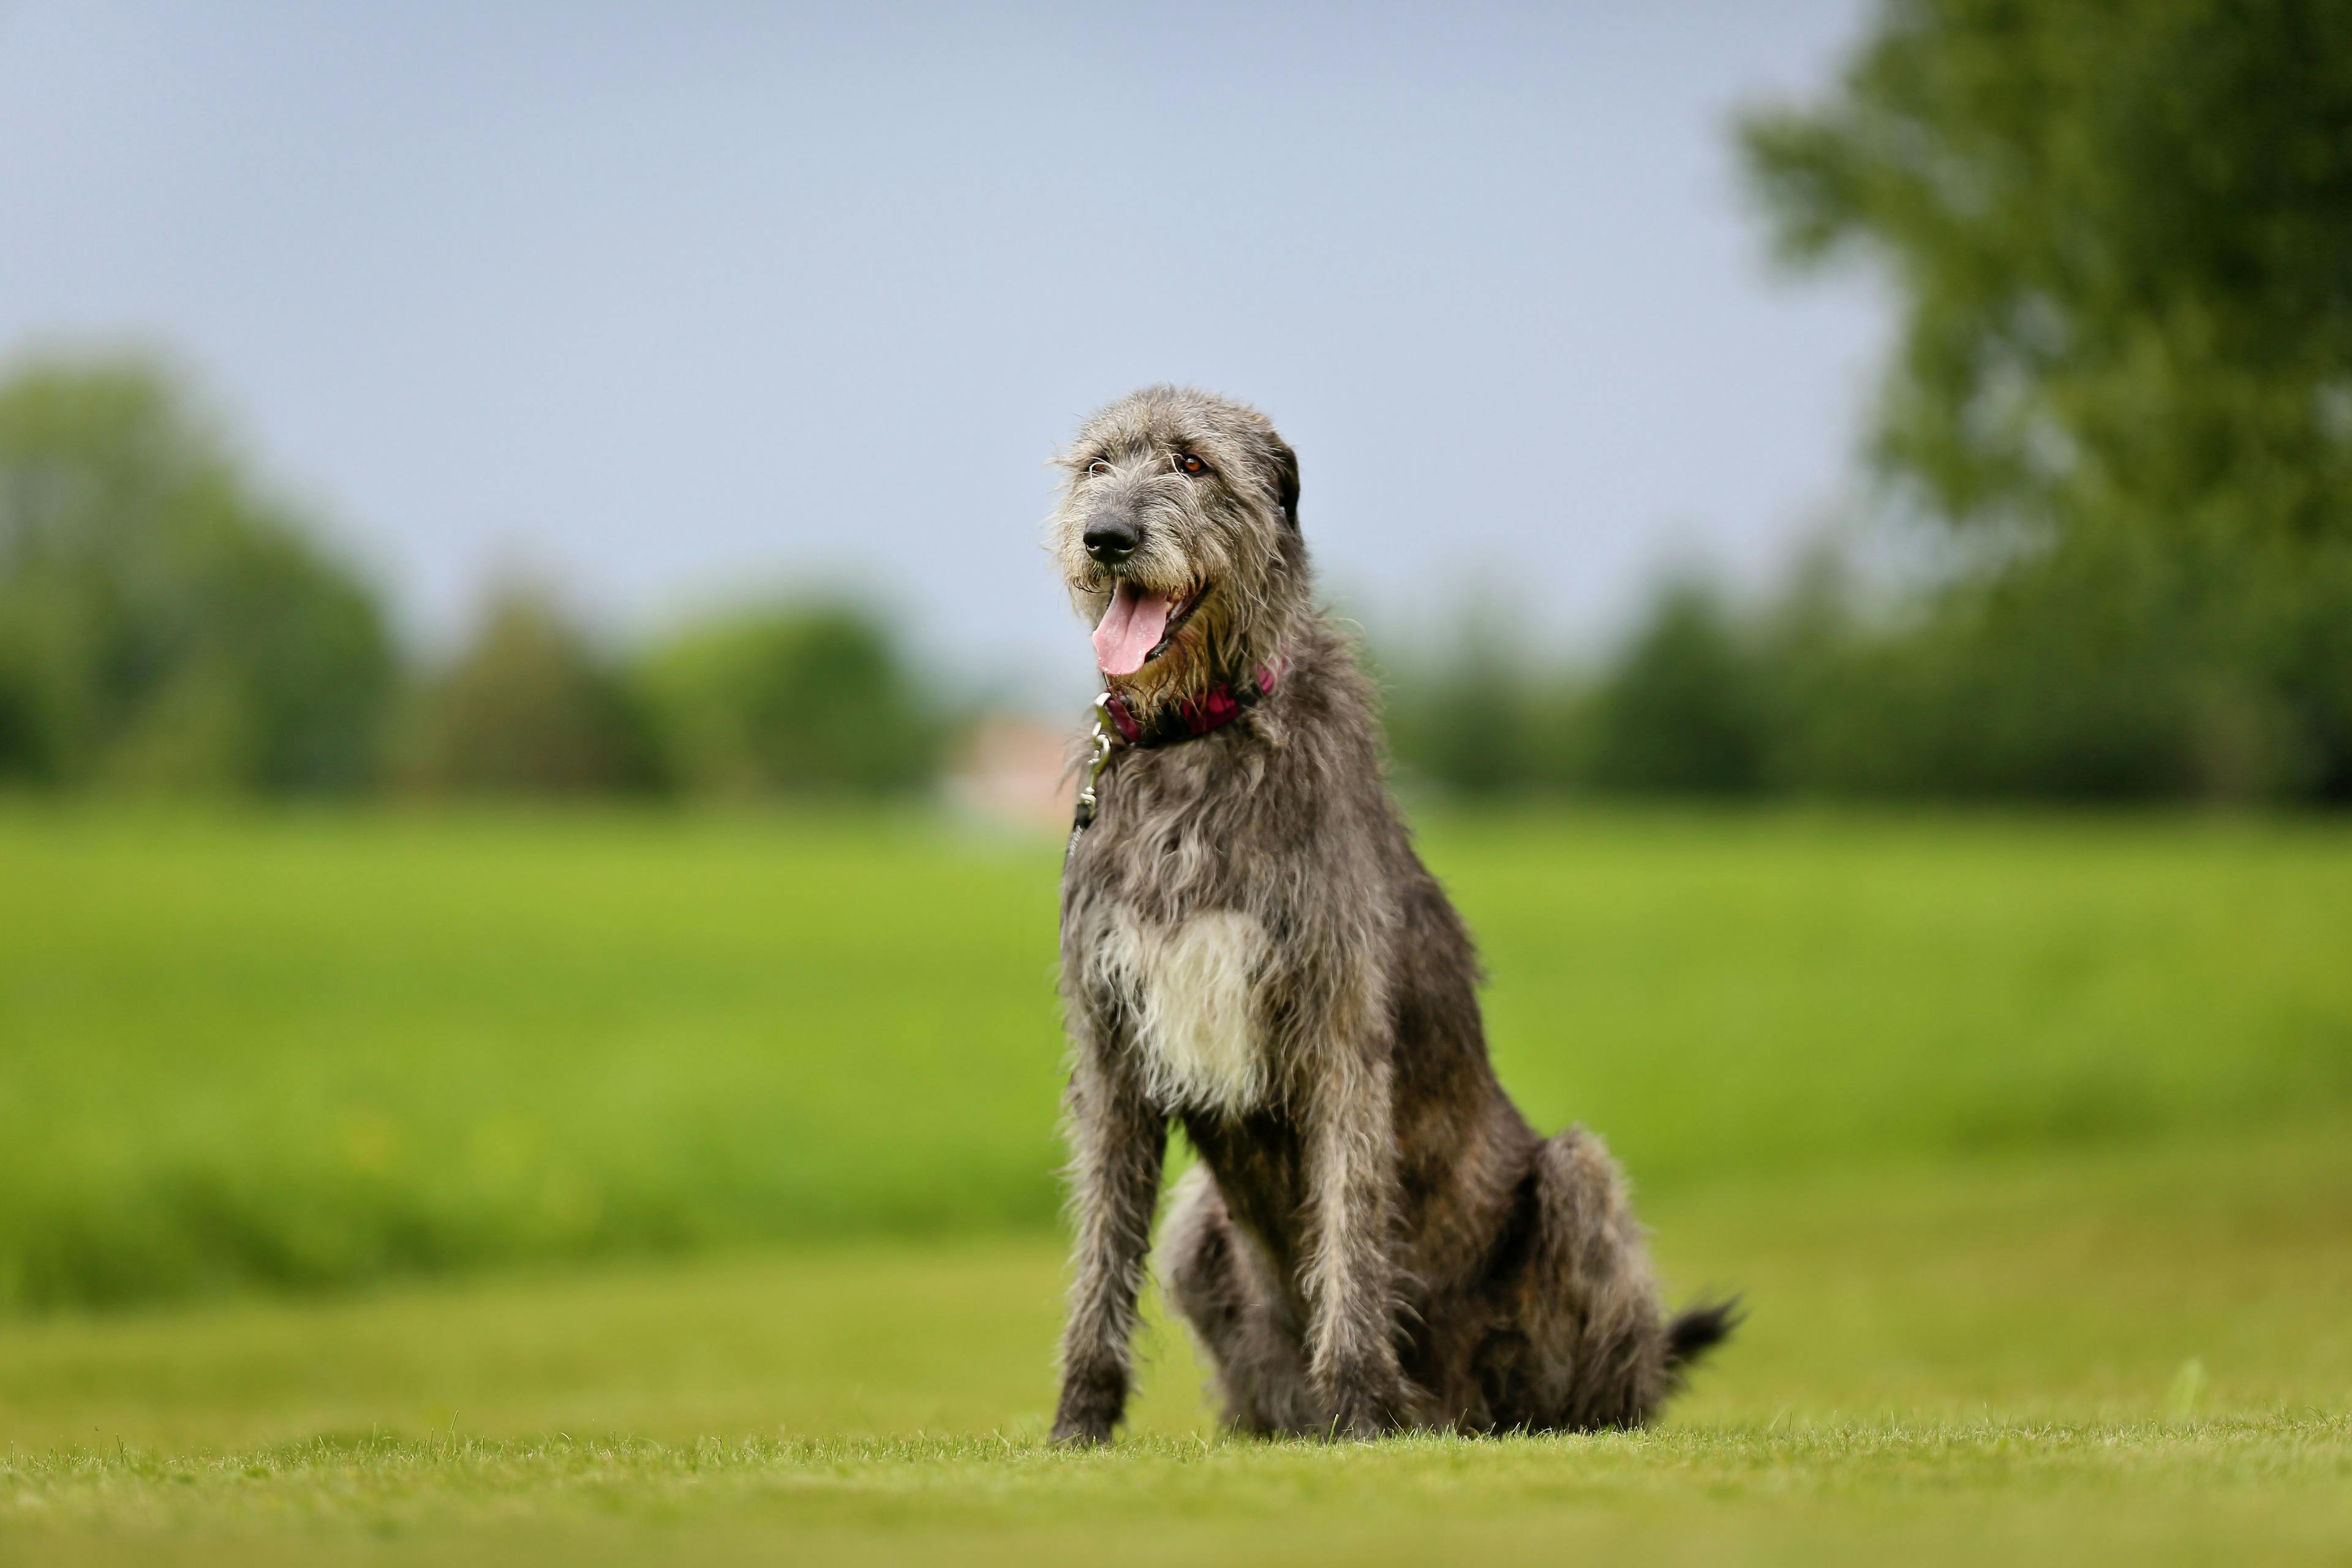 Effect of non-traditional vs traditional diets on Irish wolfhounds' heart health 